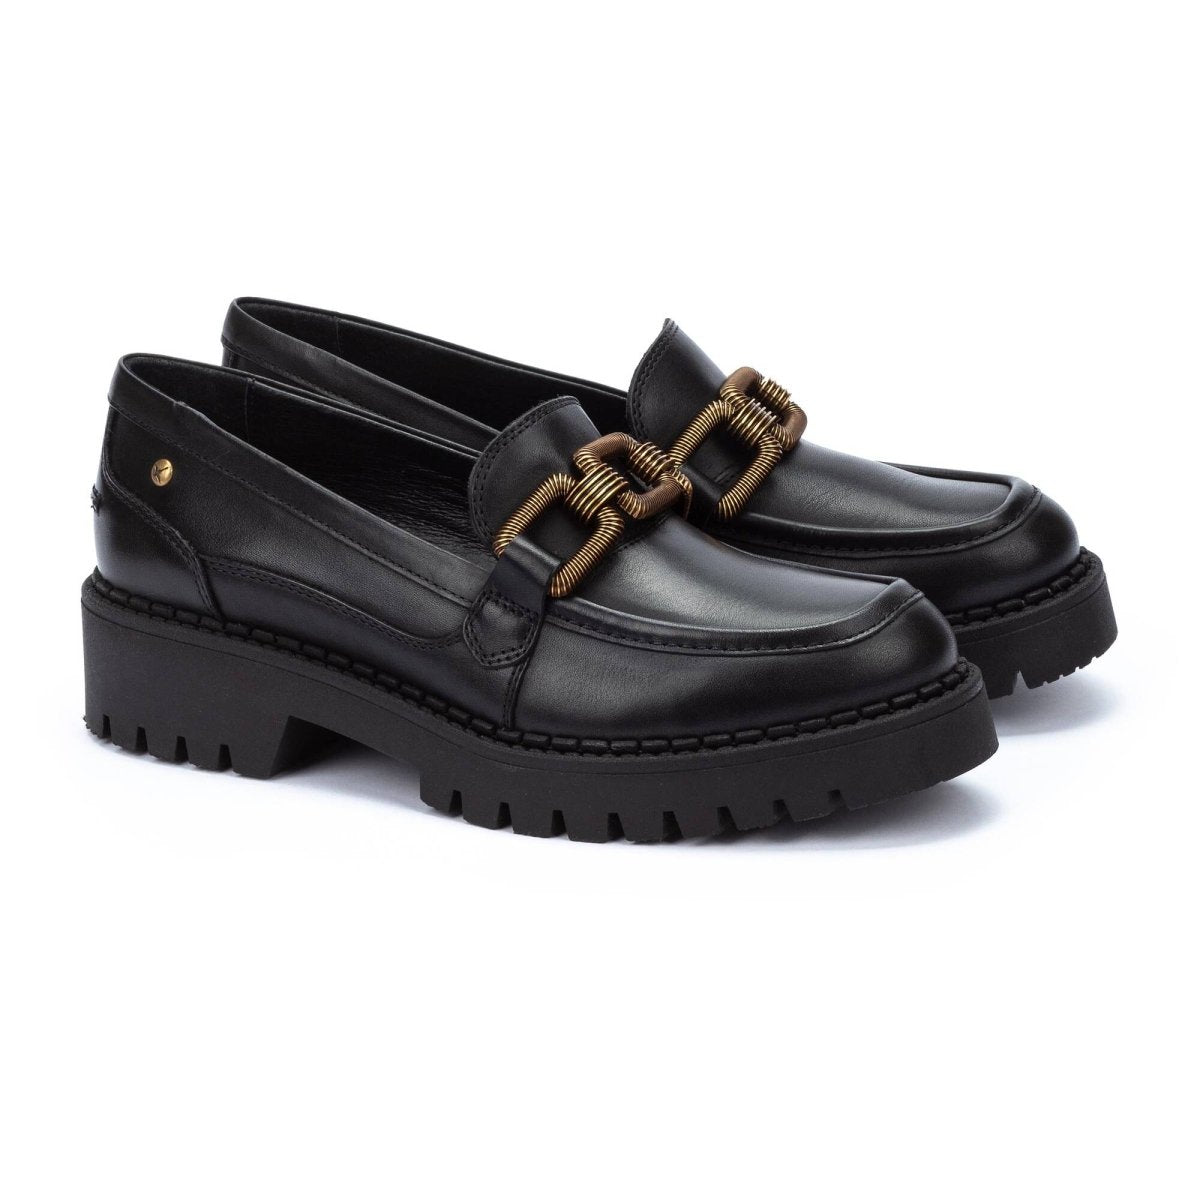 PIKOLINOS AVILES W6P-3742 WOMEN'S LOAFERS IN BLACK - TLW Shoes